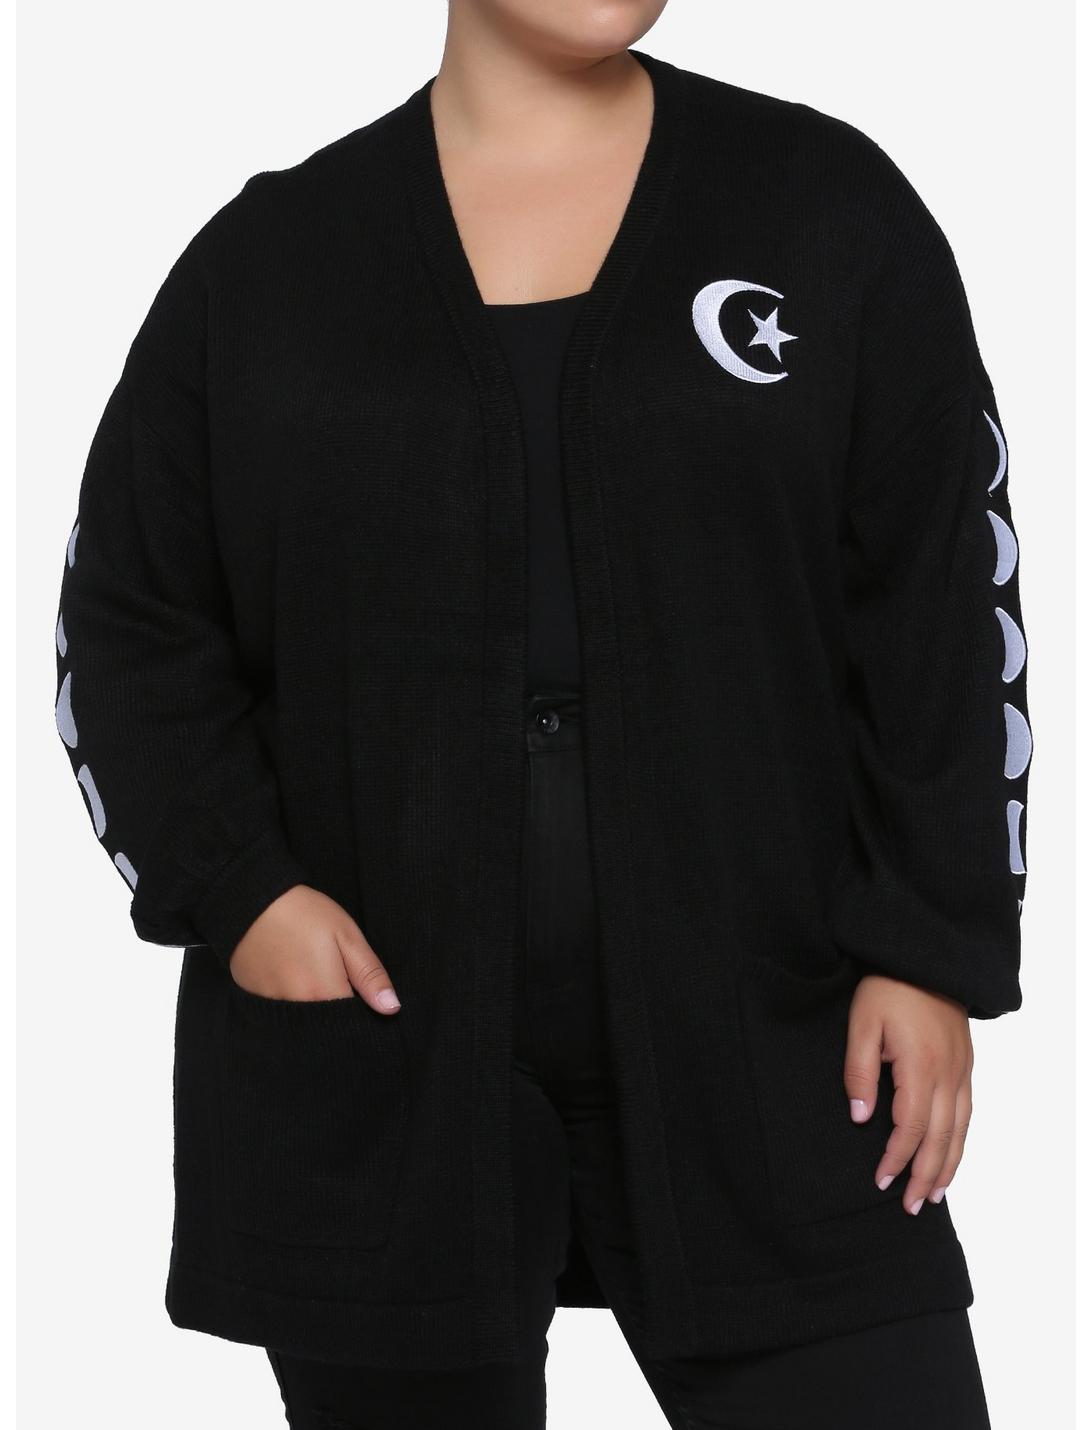 Embroidered Moon Phase Girls Open Cardigan Plus Size, MULTI, hi-res